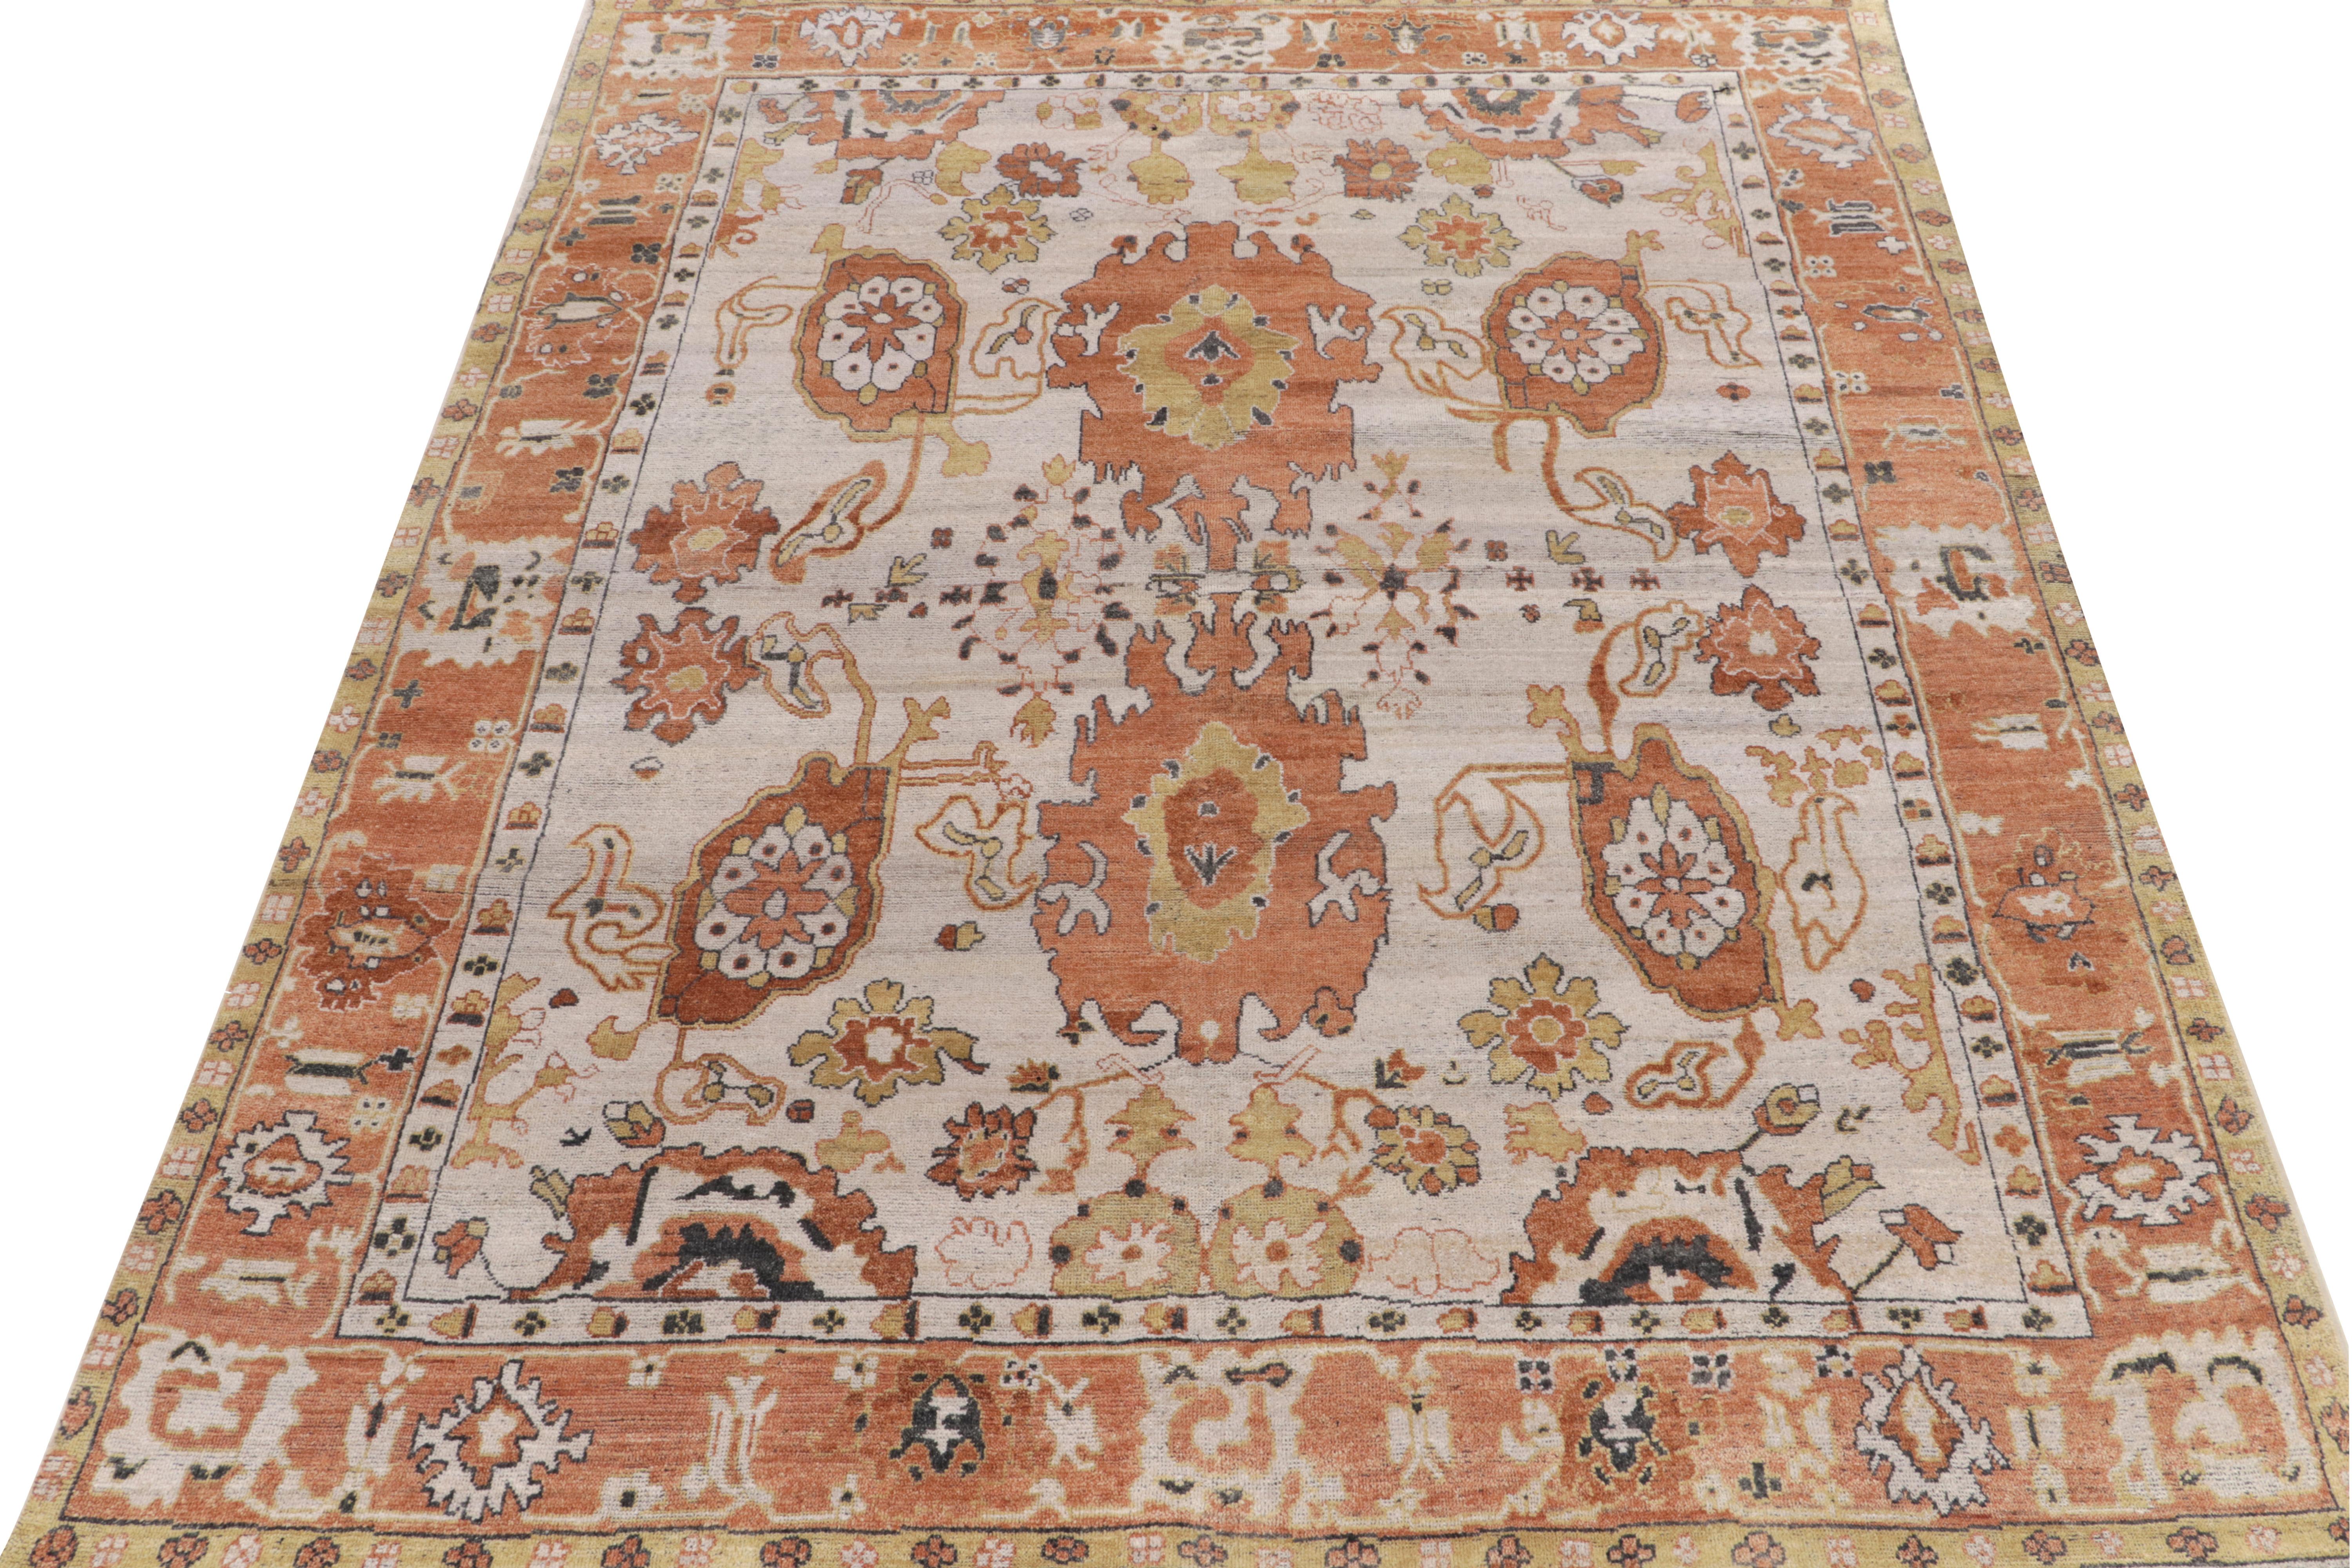 Tribal Rug & Kilim's 1900s Oushak Style Rug in White, Orange and Gold Floral Pattern For Sale